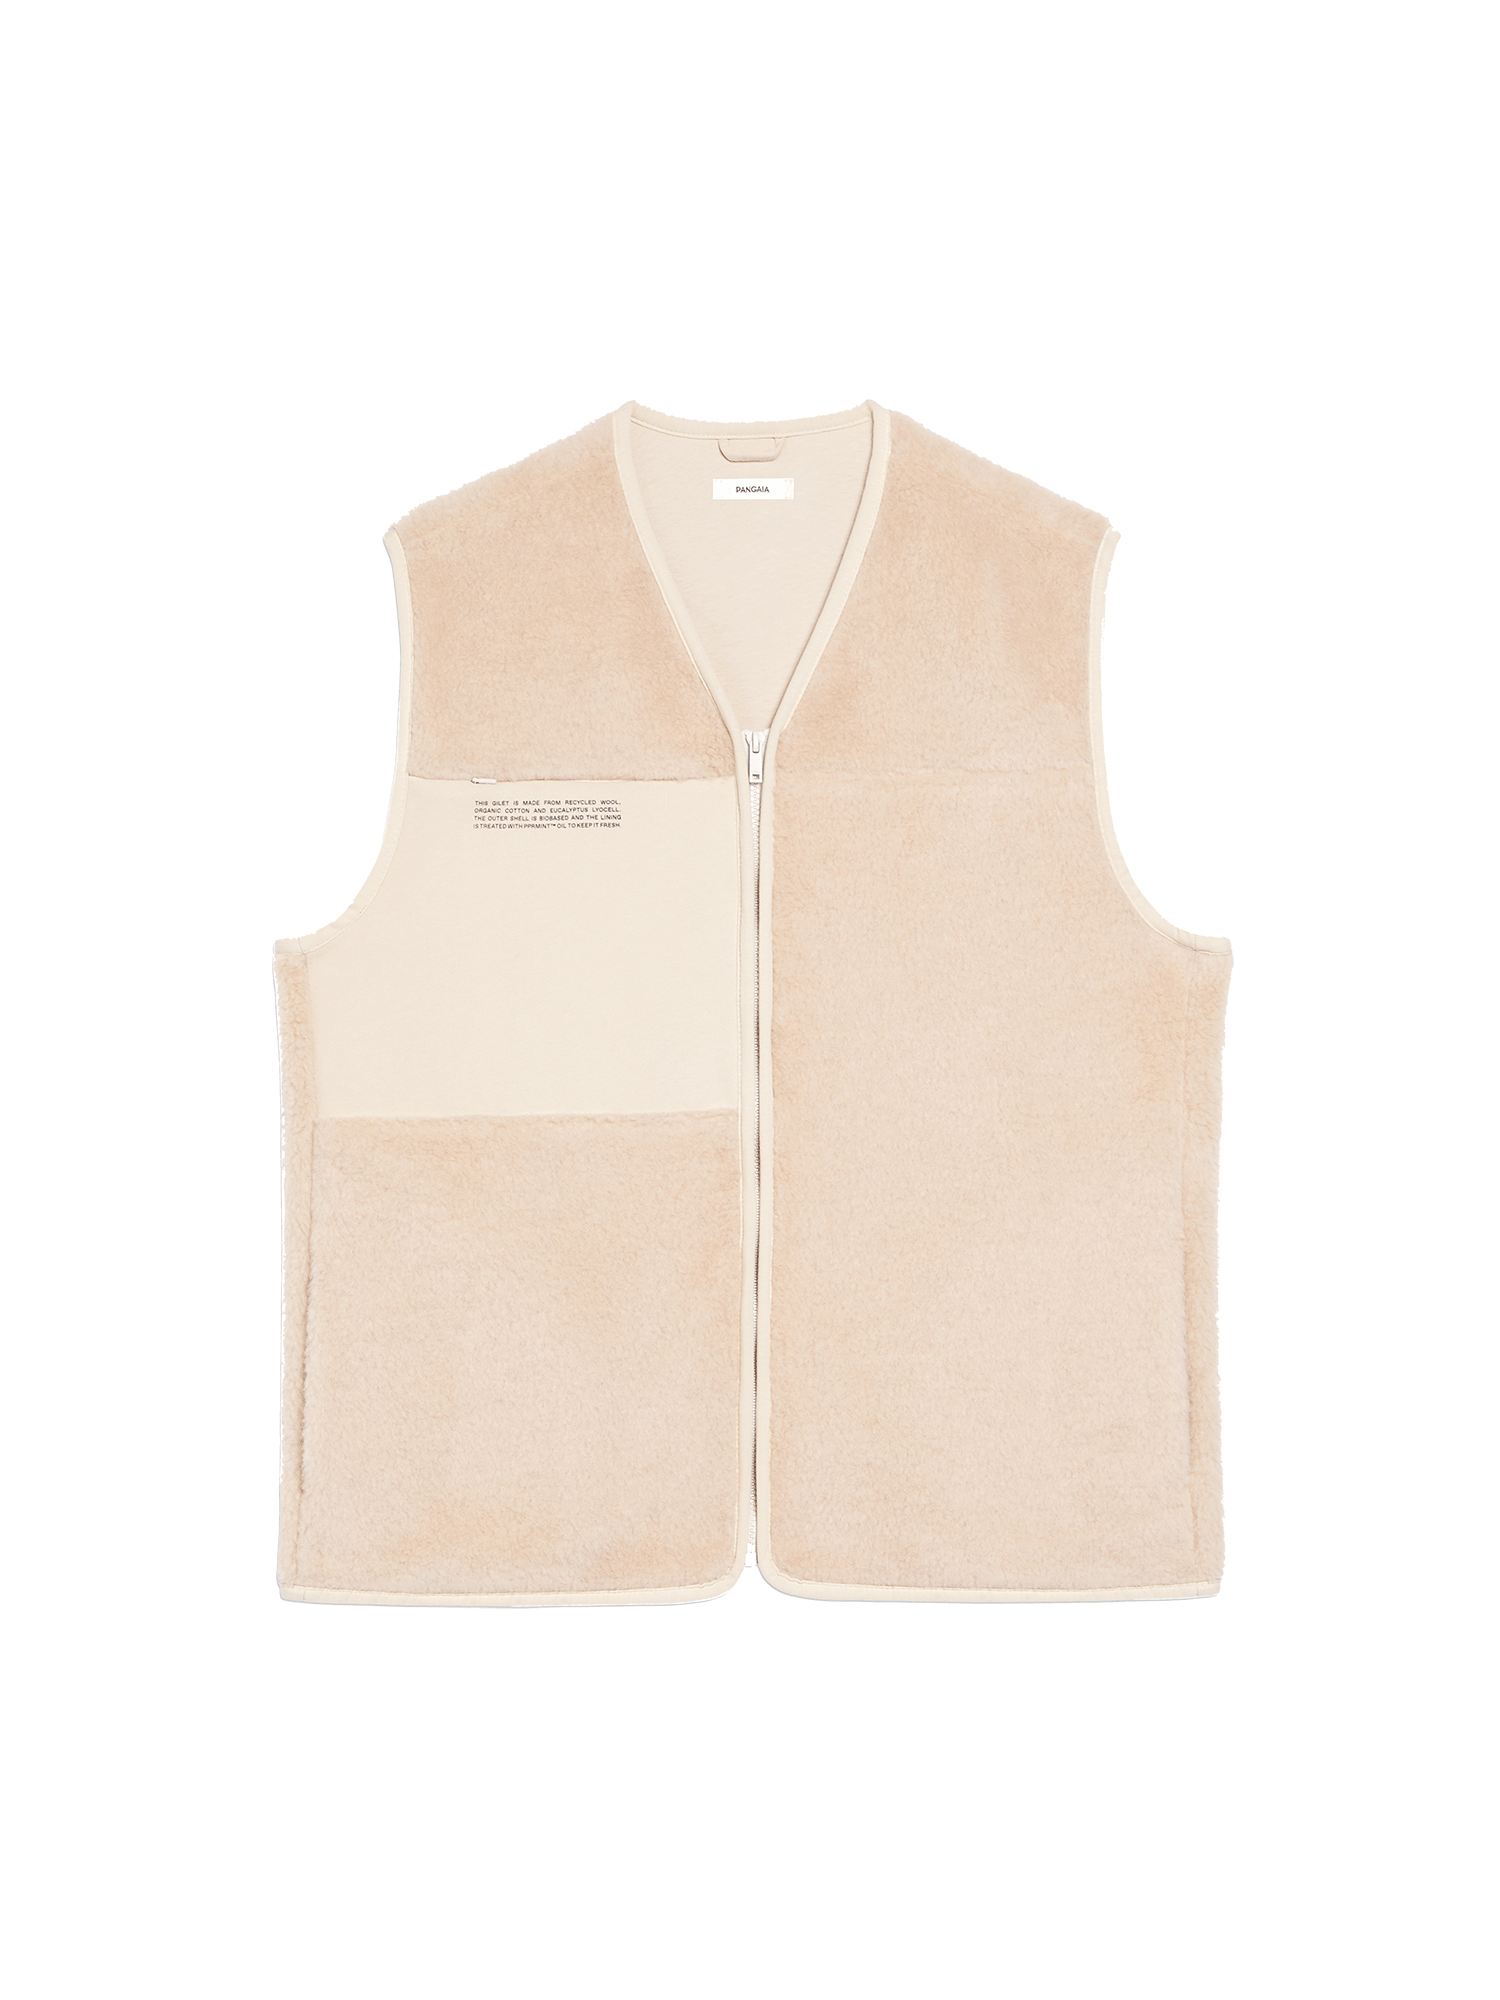 gilet picture organic